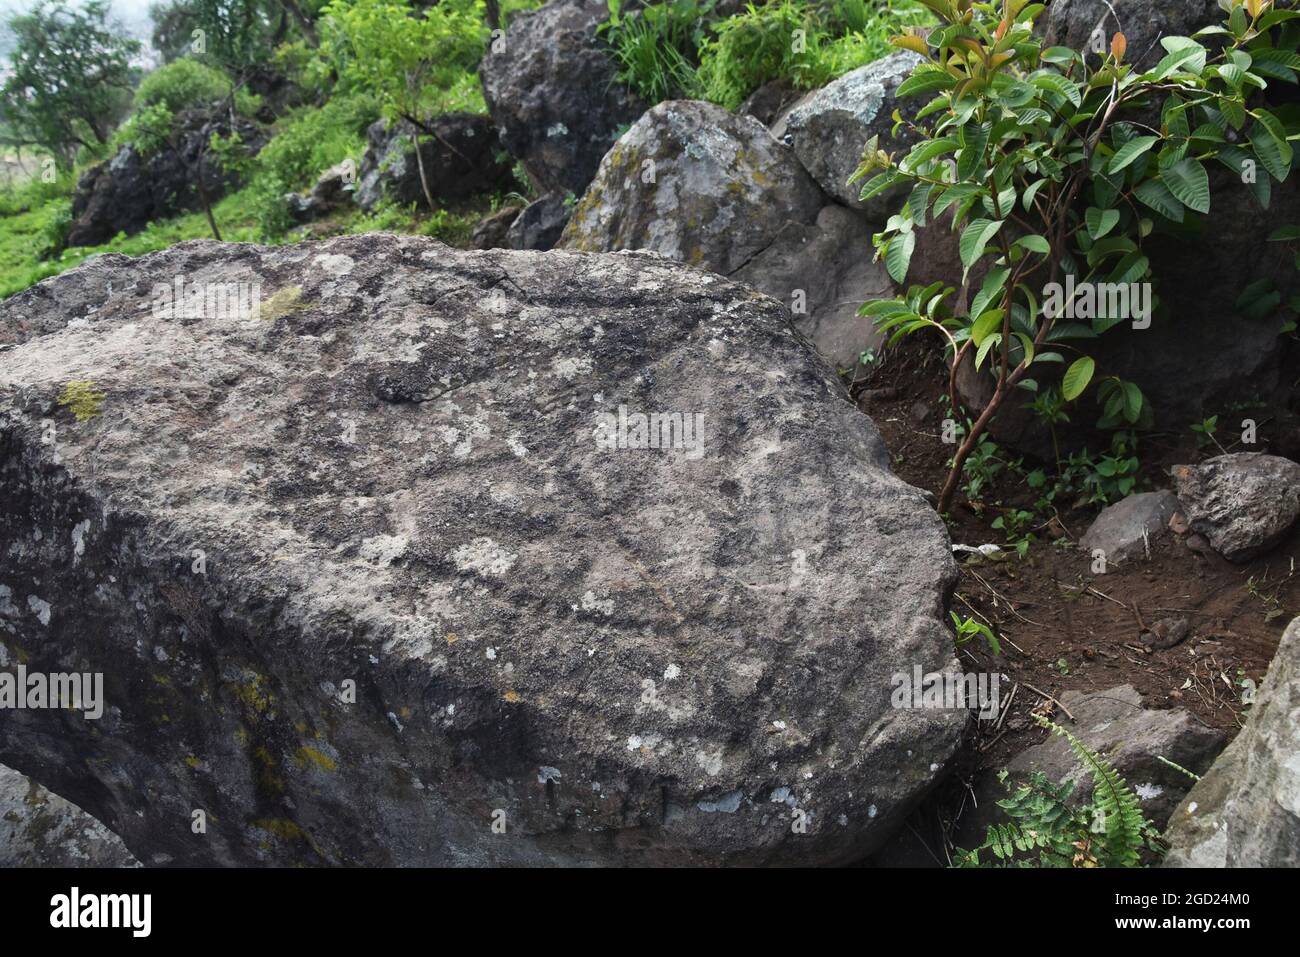 Pecked cross (cruz punteada), a pre-Hispanic rock carving most likely used as an astronomical device. Stock Photo